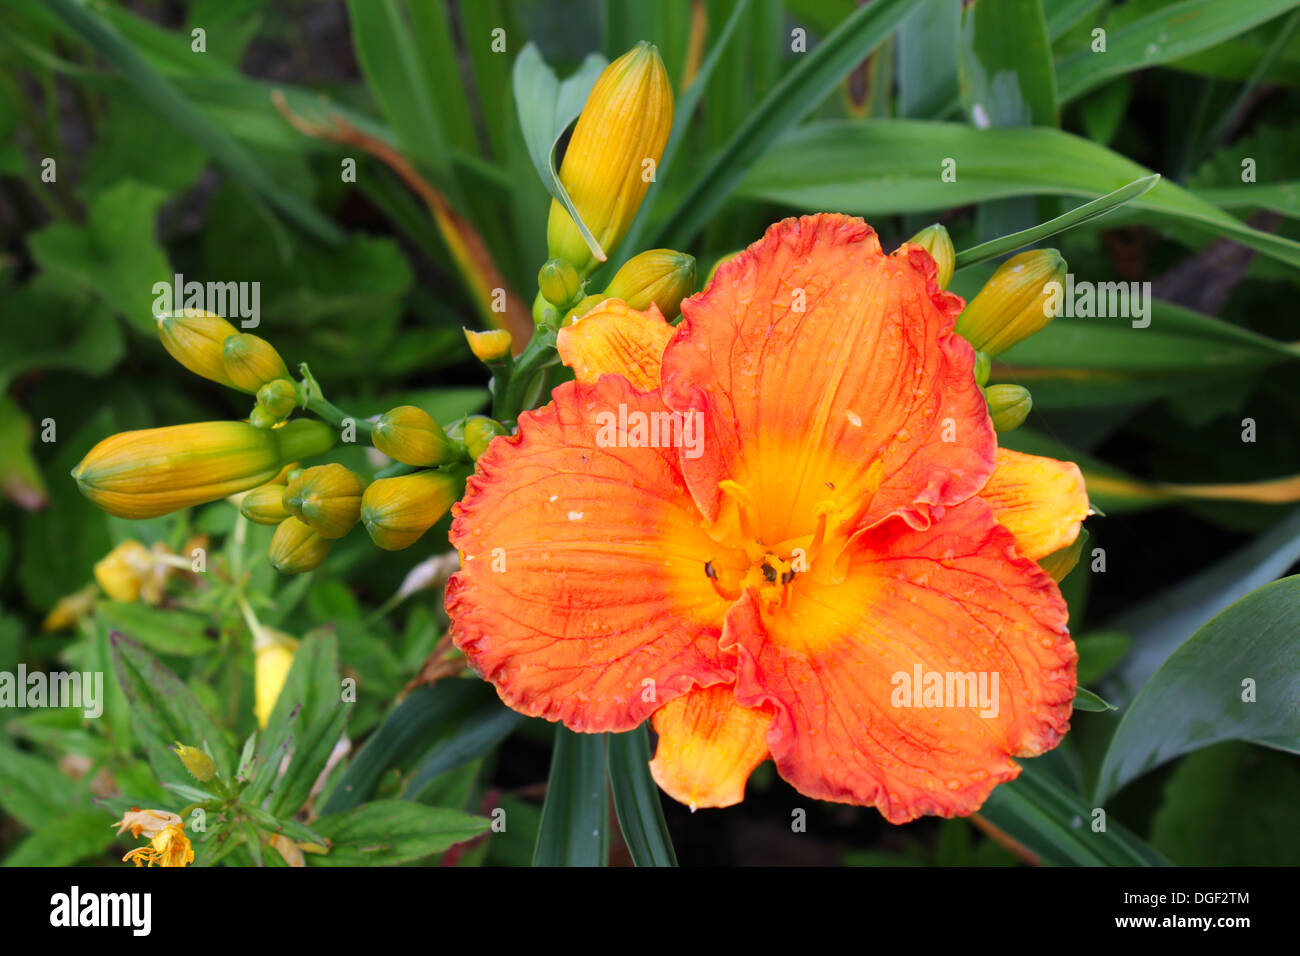 Gladiolus is a genus of perennial flower in the iris family. Stock Photo